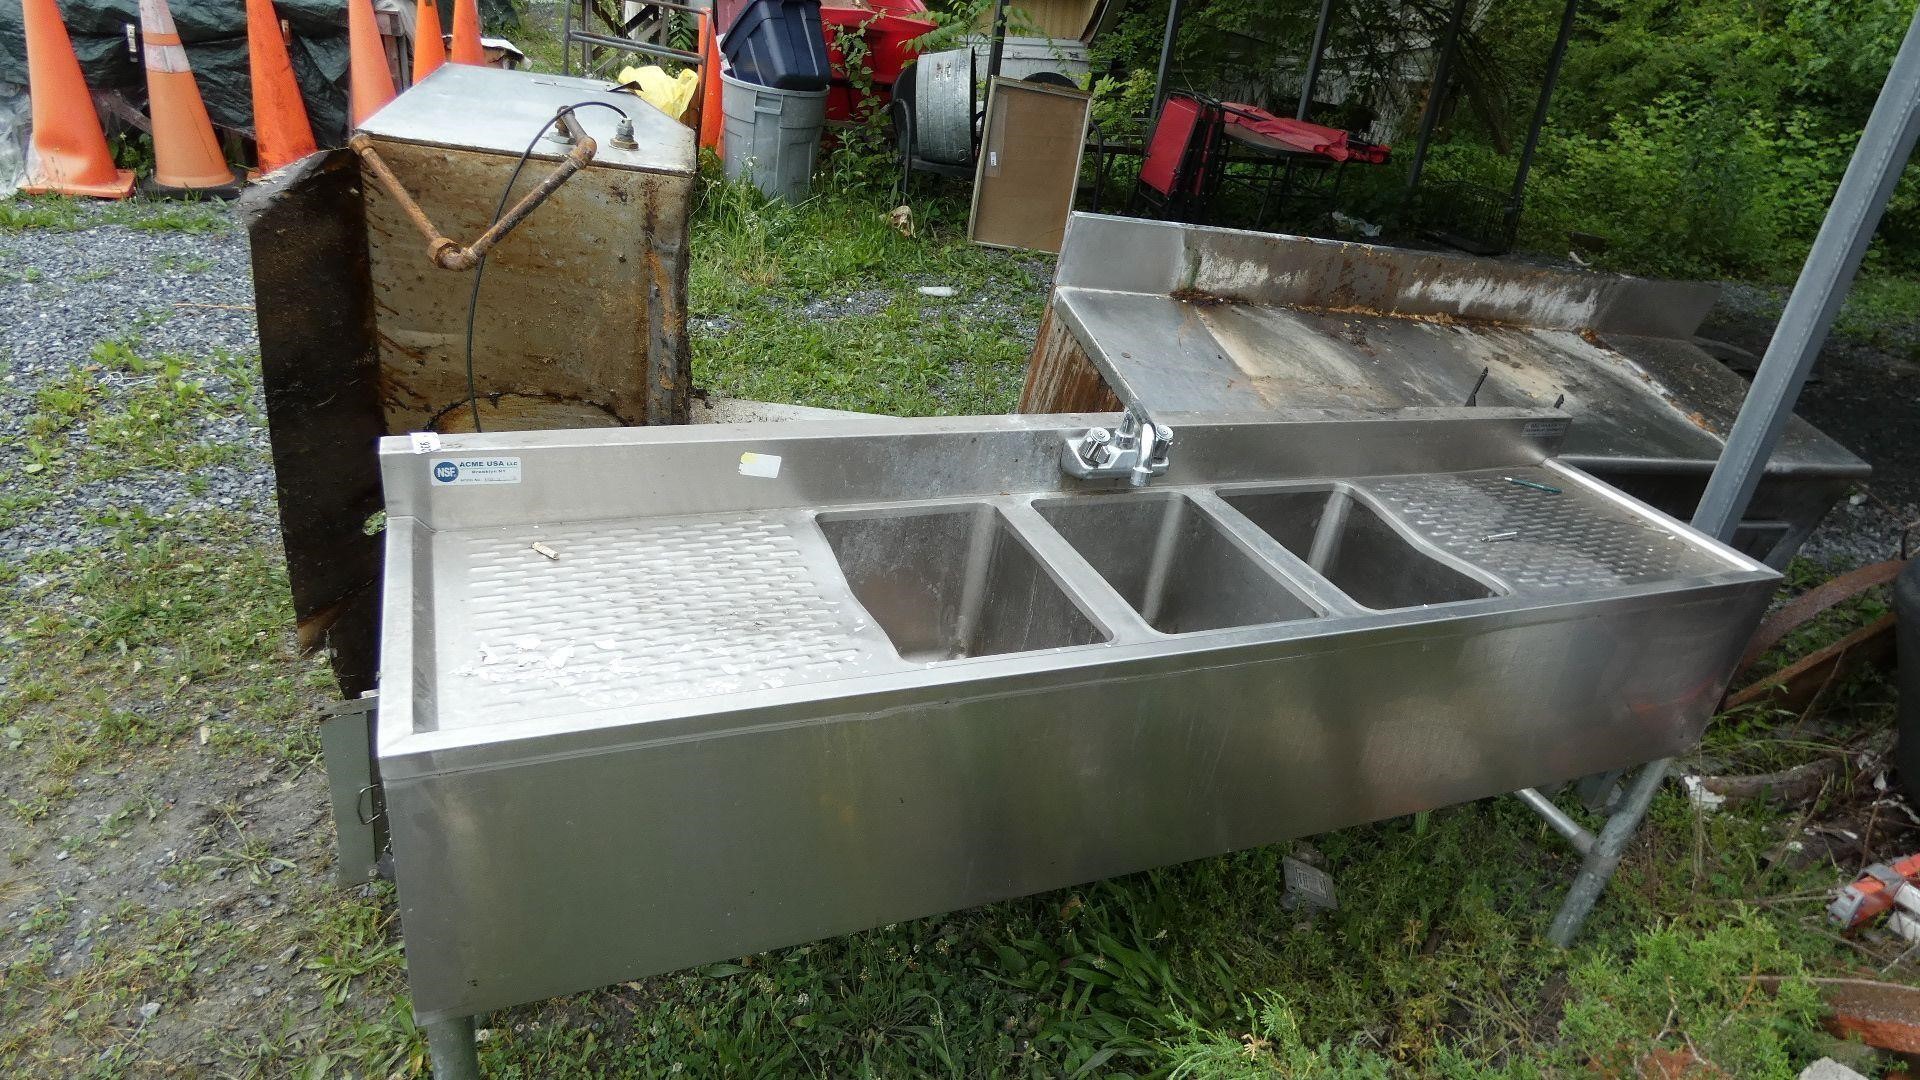 NSF Stainless Sink, Hood & Cooler - UNTESTED